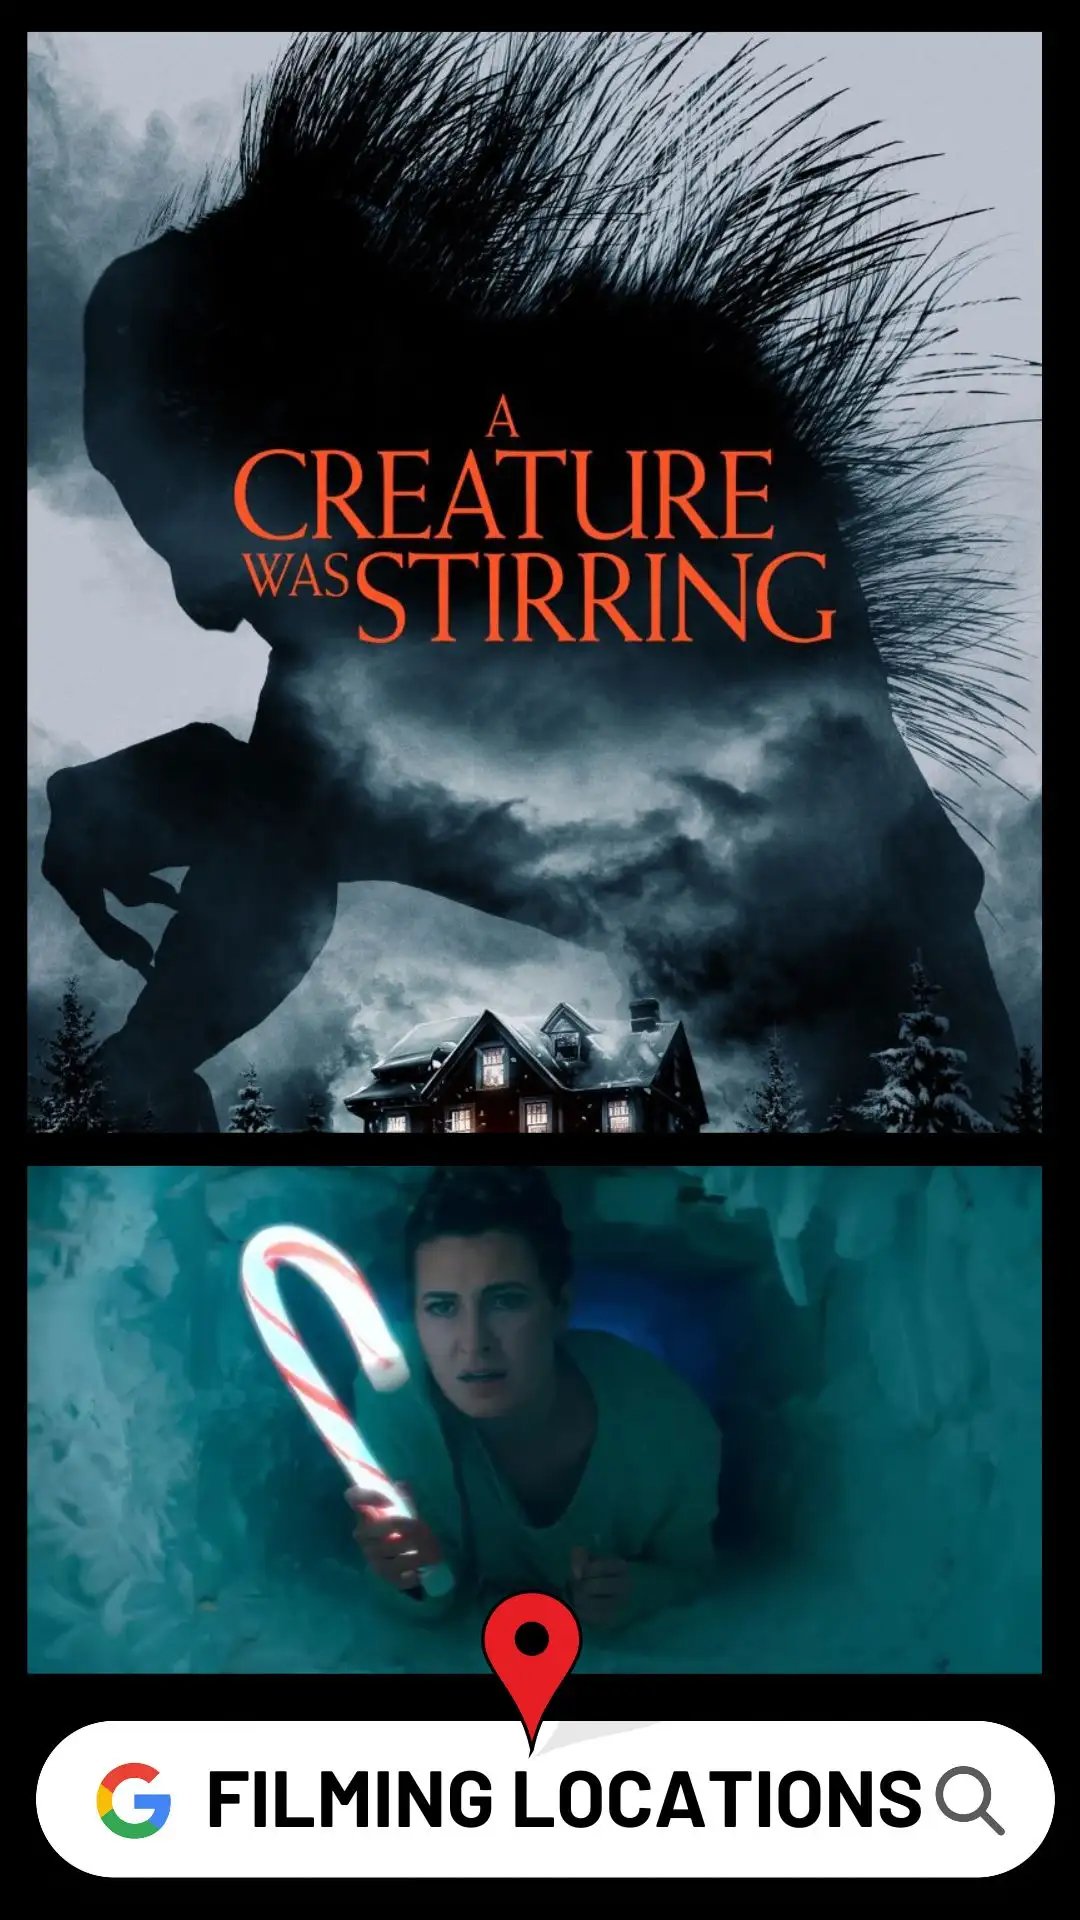 A Creature Was Stirring Filming Locations